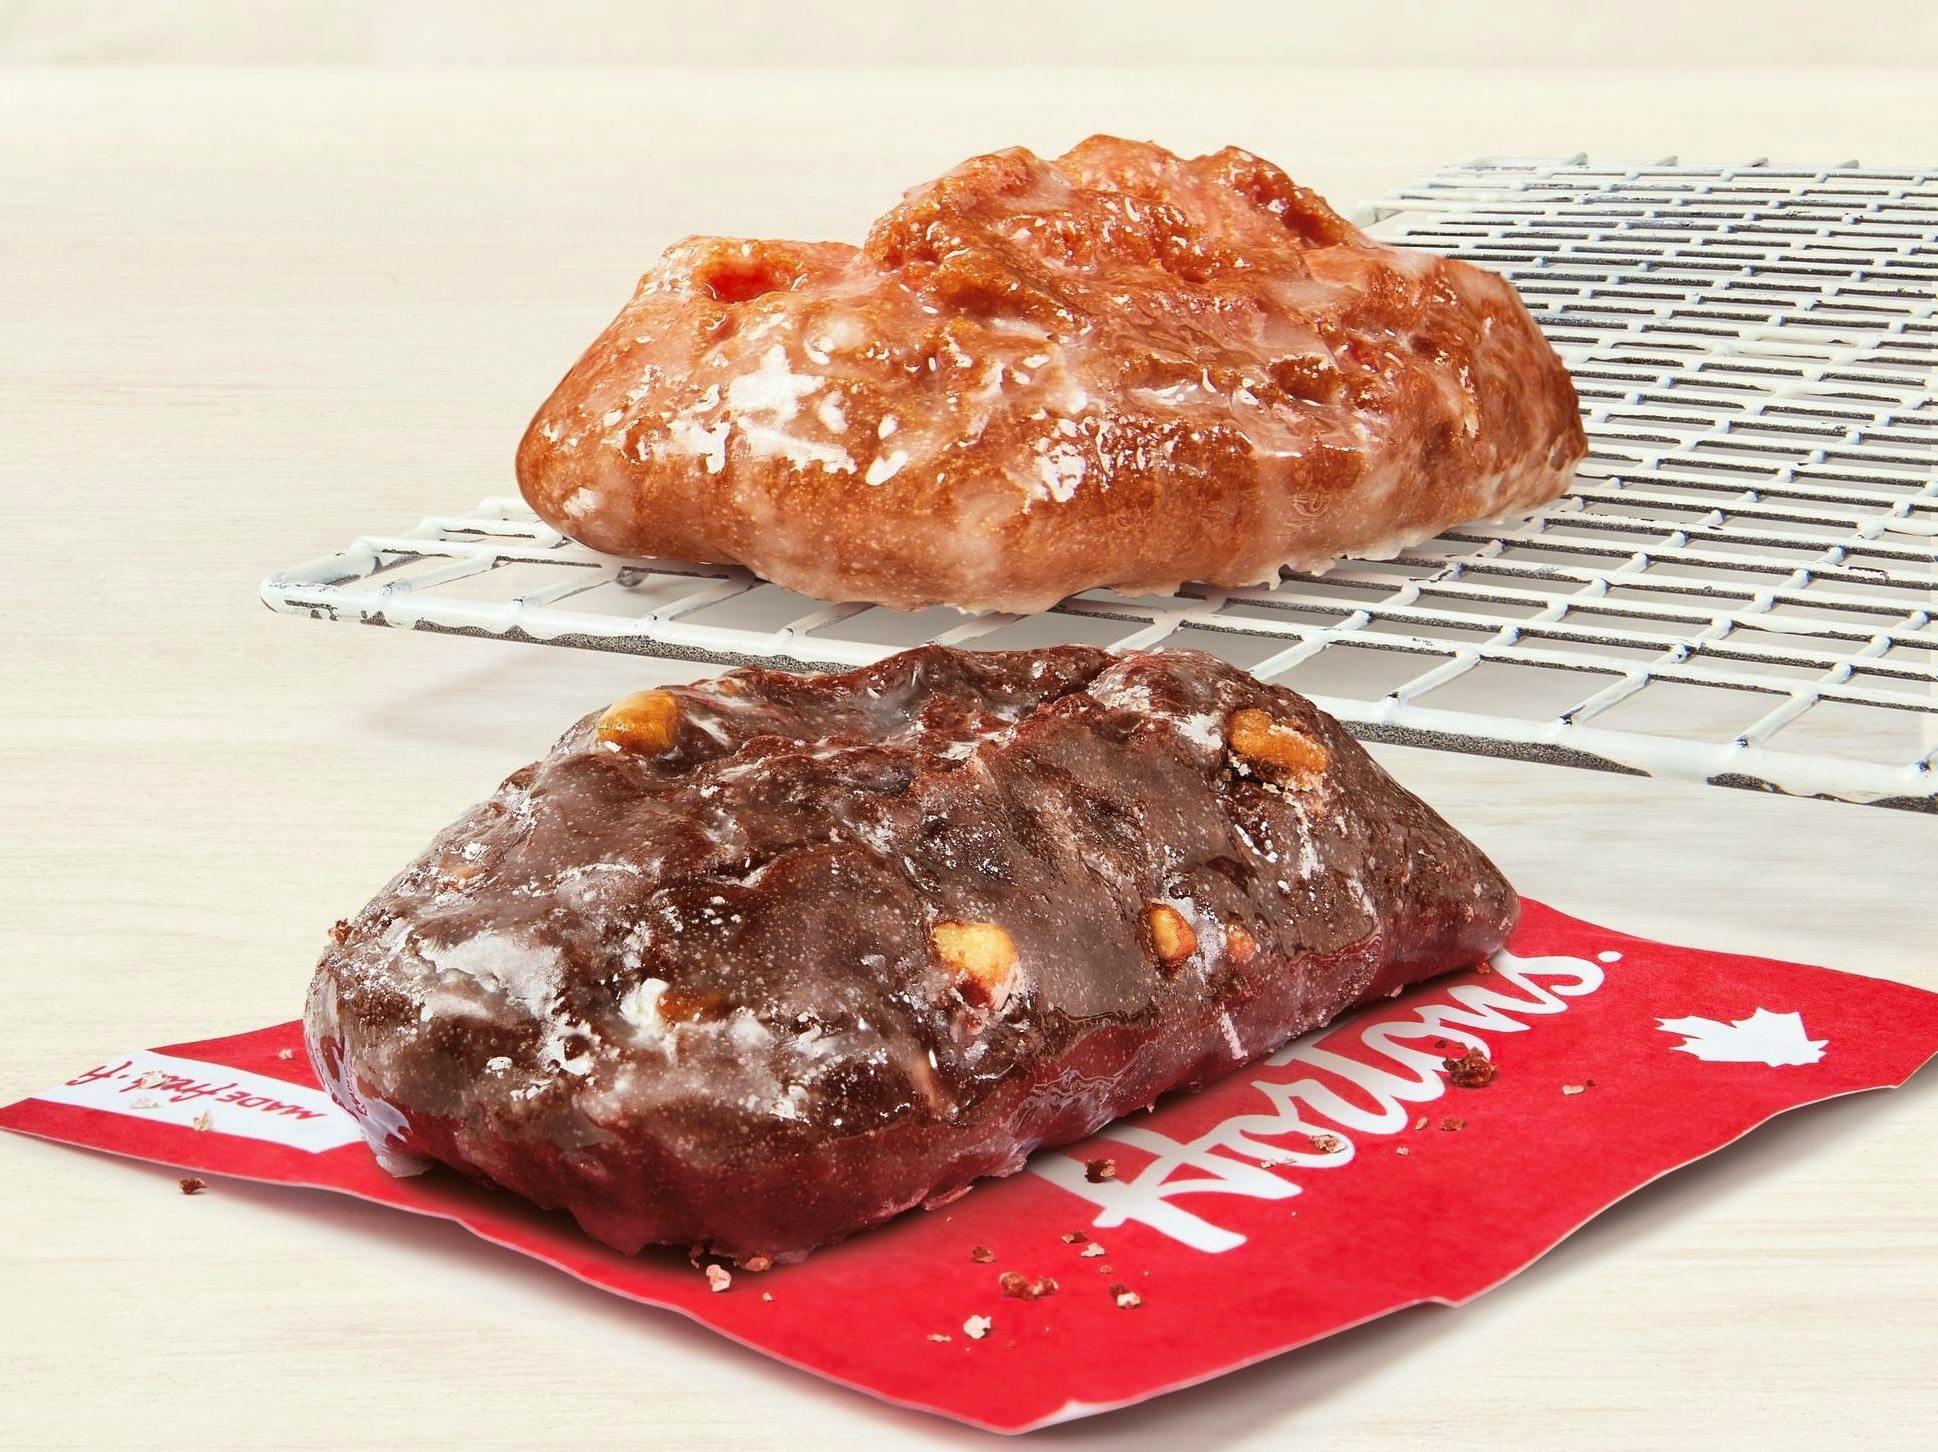 Breakfast at Tims for under $3*: Tim Hortons launches Tim Selects